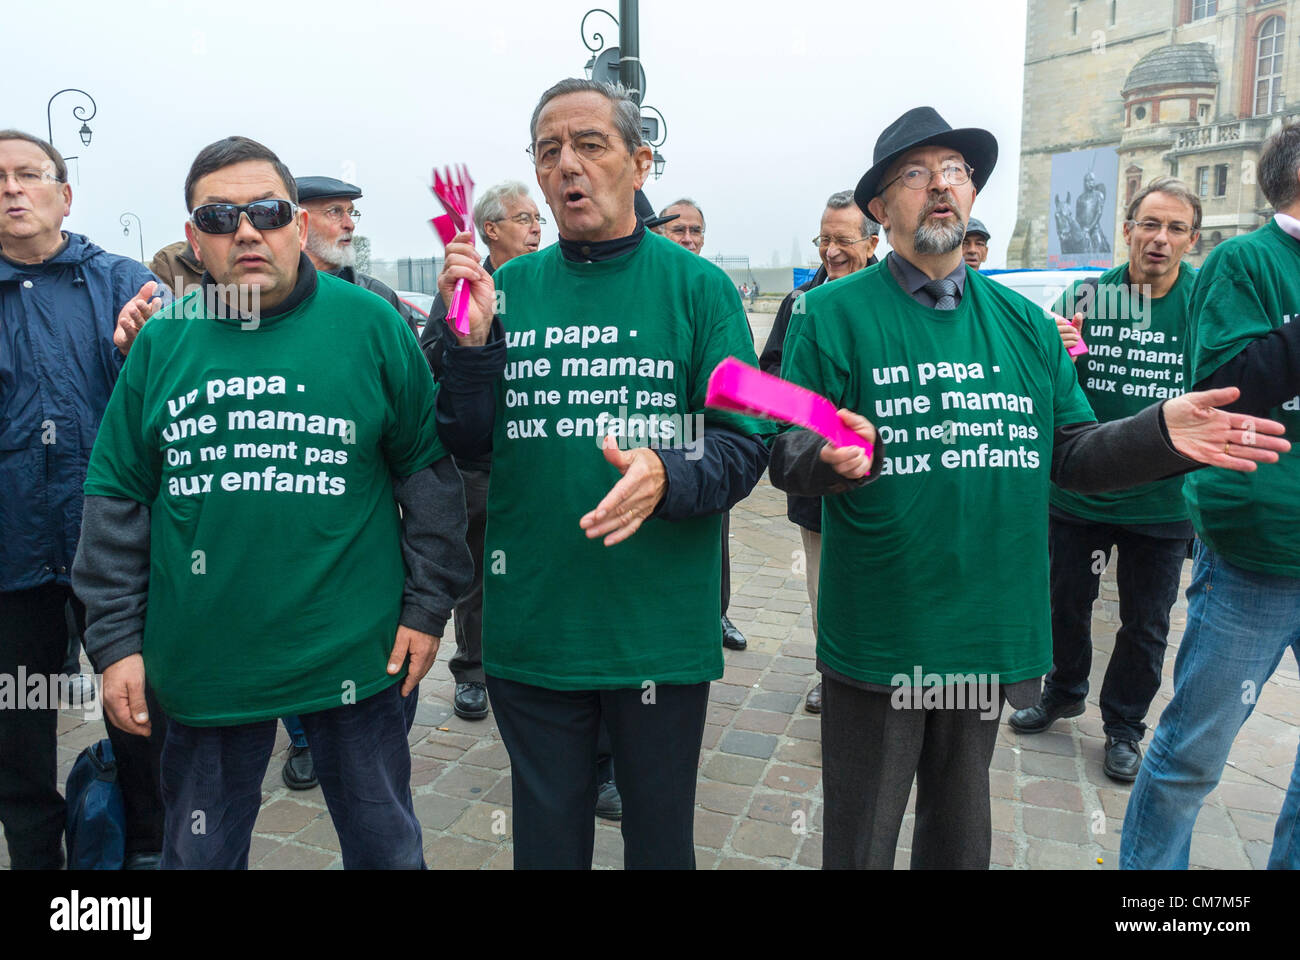 Paris, France, Group Men with Militant T-Shirts, French Extreme Right, 'Alliance Vita' Protesters 'Anti Gay Marriage', Homophobia, extreme prejudice, catholic activists Stock Photo